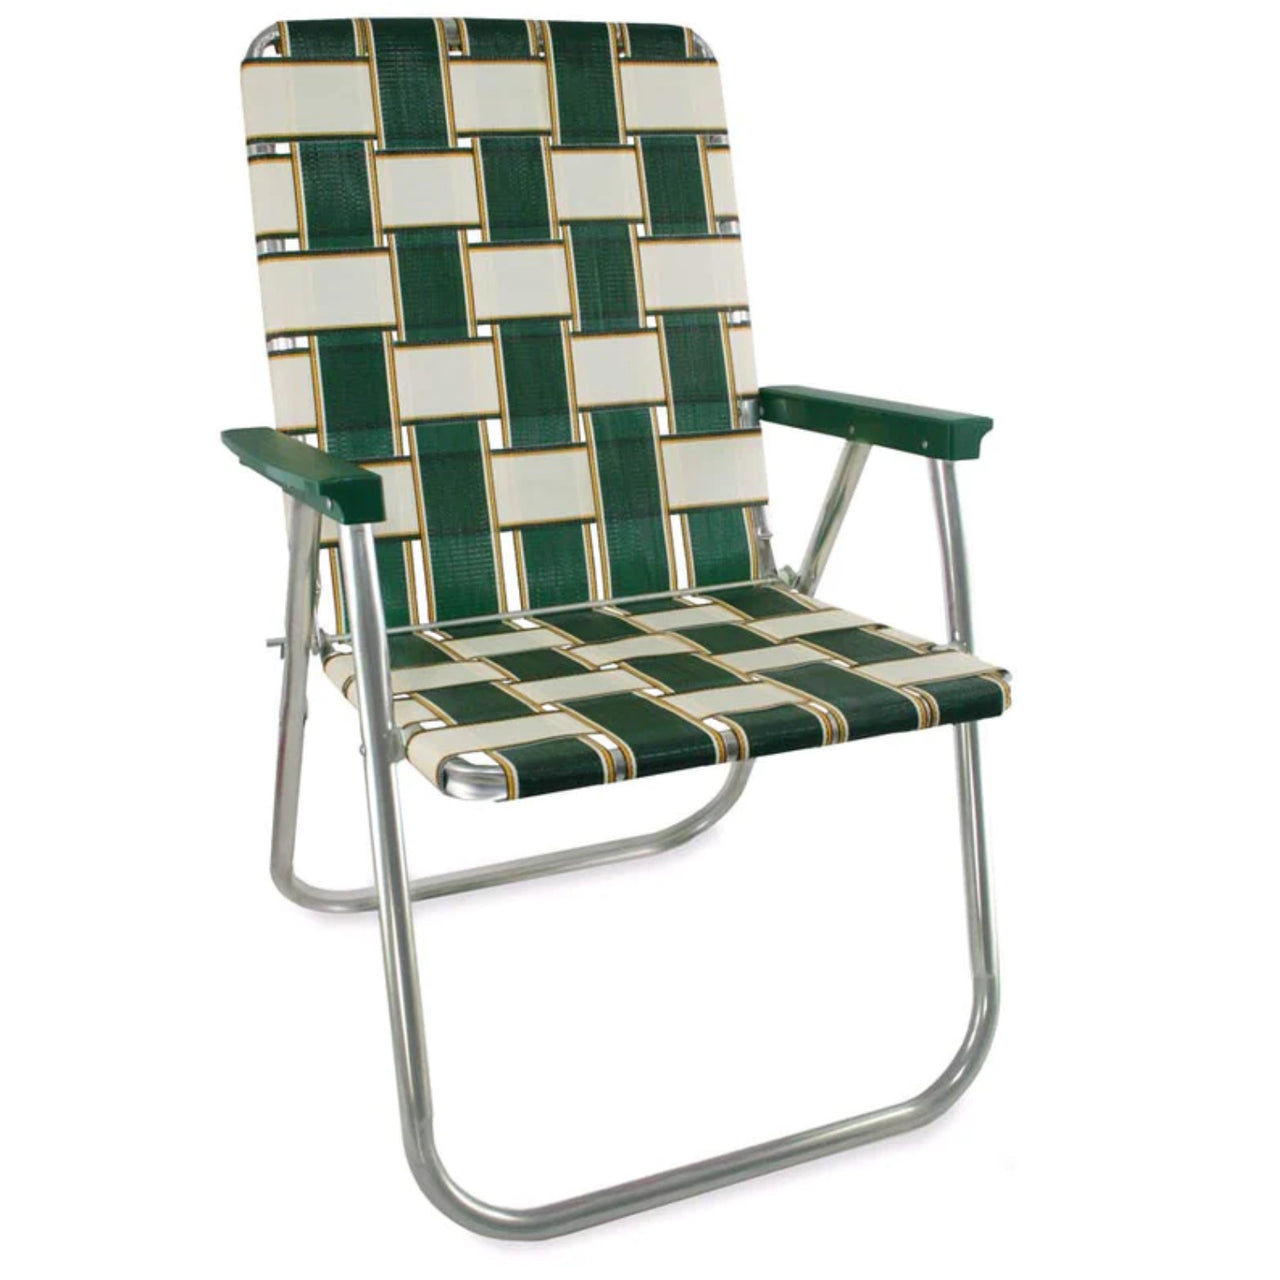 Lawn Chair | Charleston Deluxe